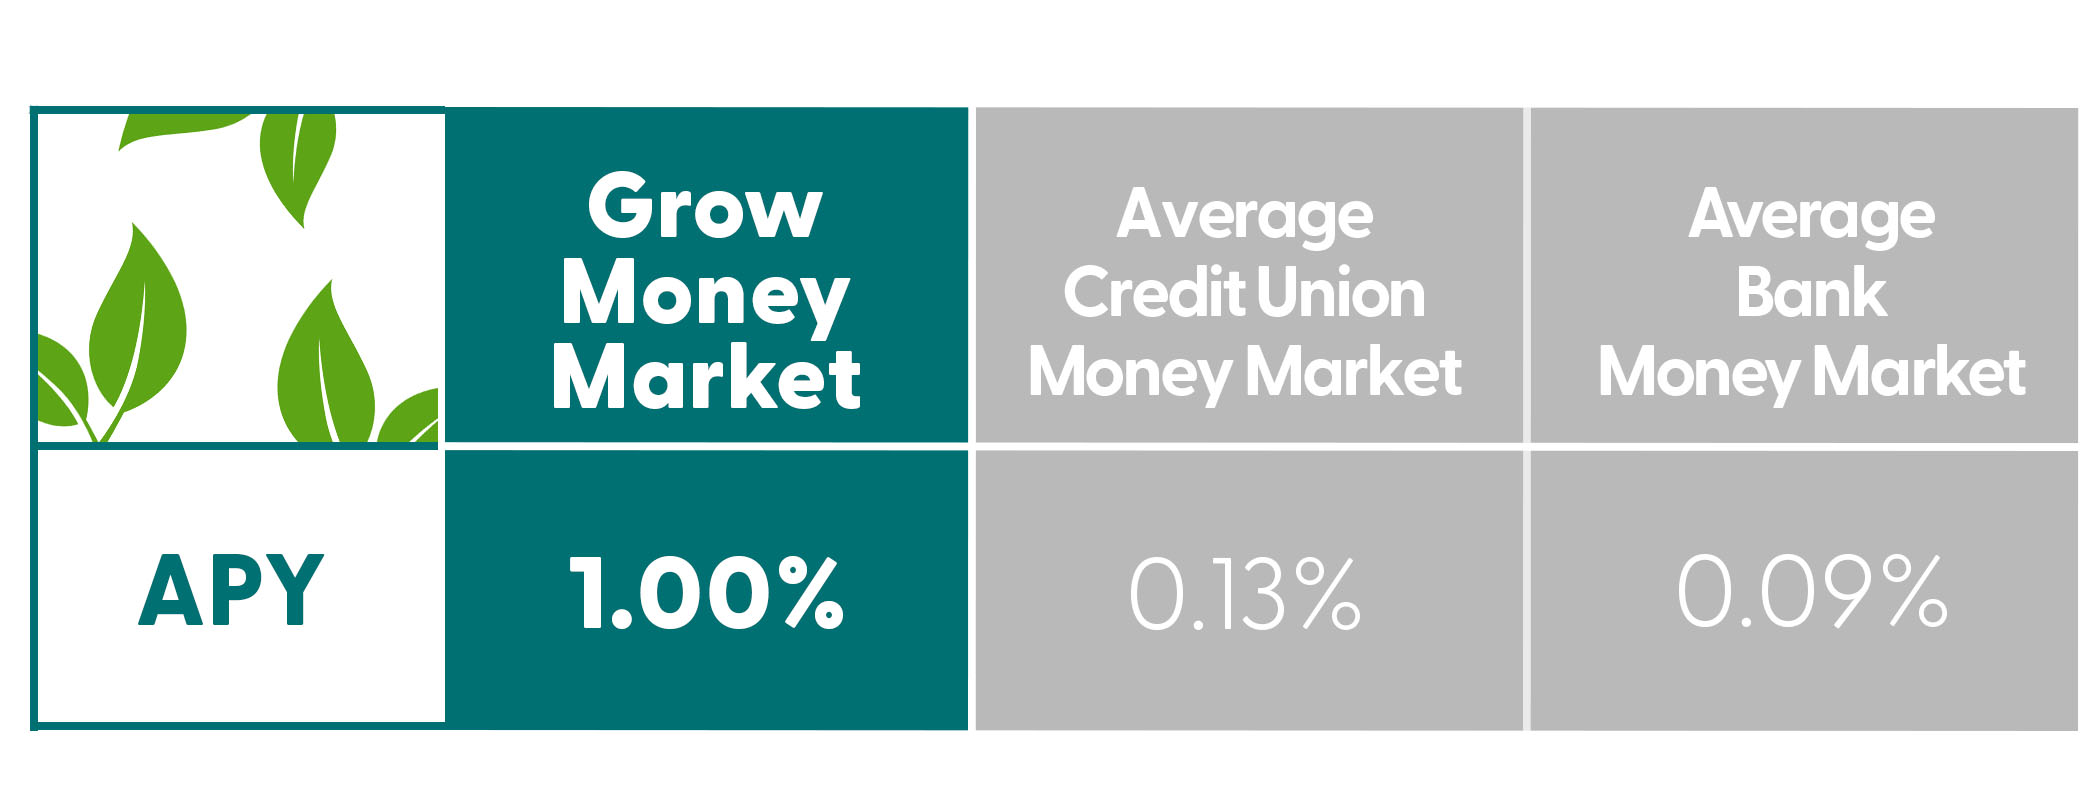 Earn 1.00% APY with the Sandia Area Grow Money Market Account! Compare to the National Average and see how you can start saving today.